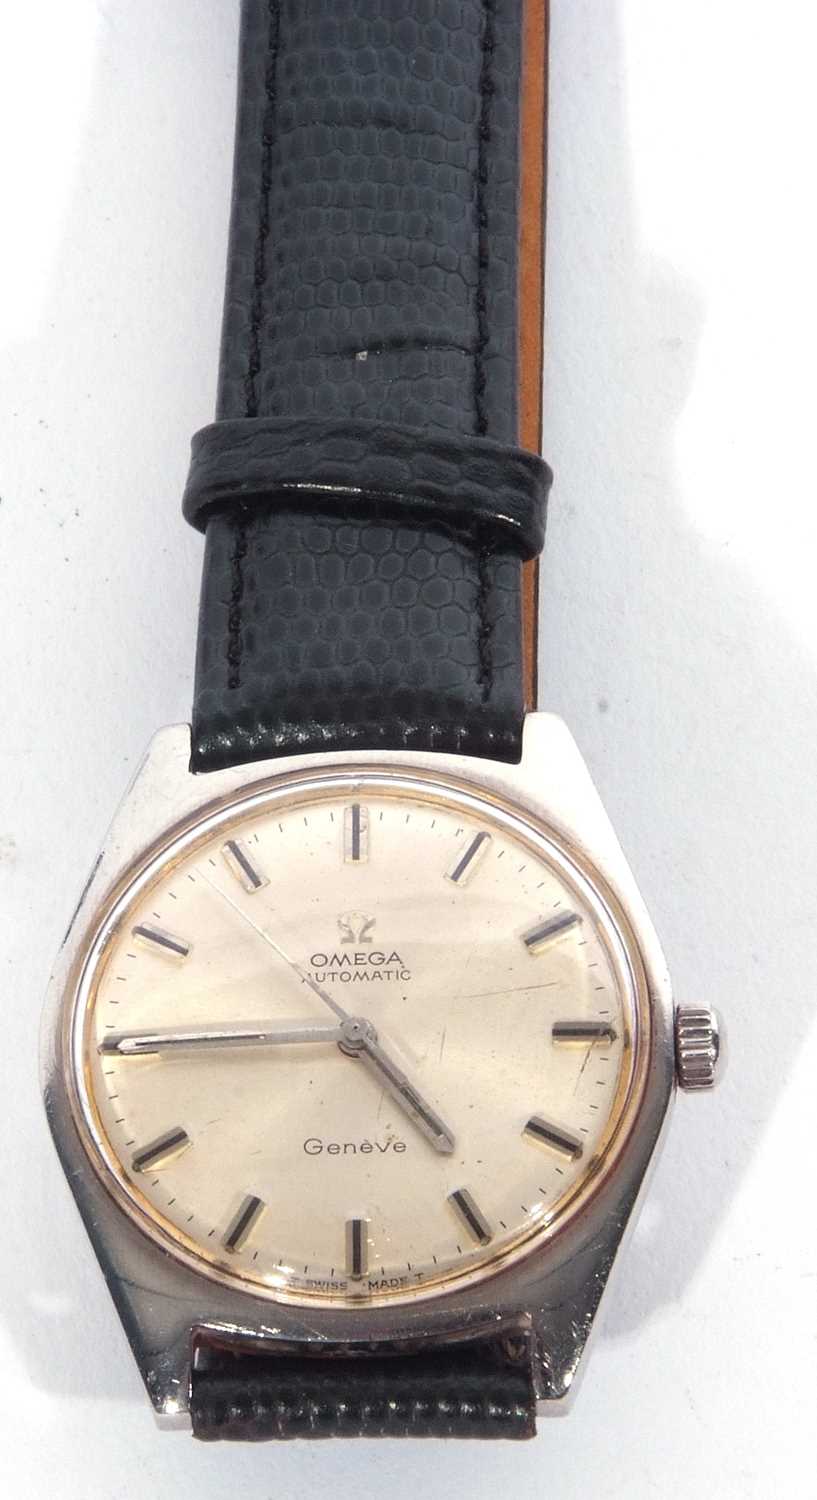 Gents Omega Geneve automatic wrist watch dated 1968, calibre 552 automatic movement, white metal - Image 3 of 6